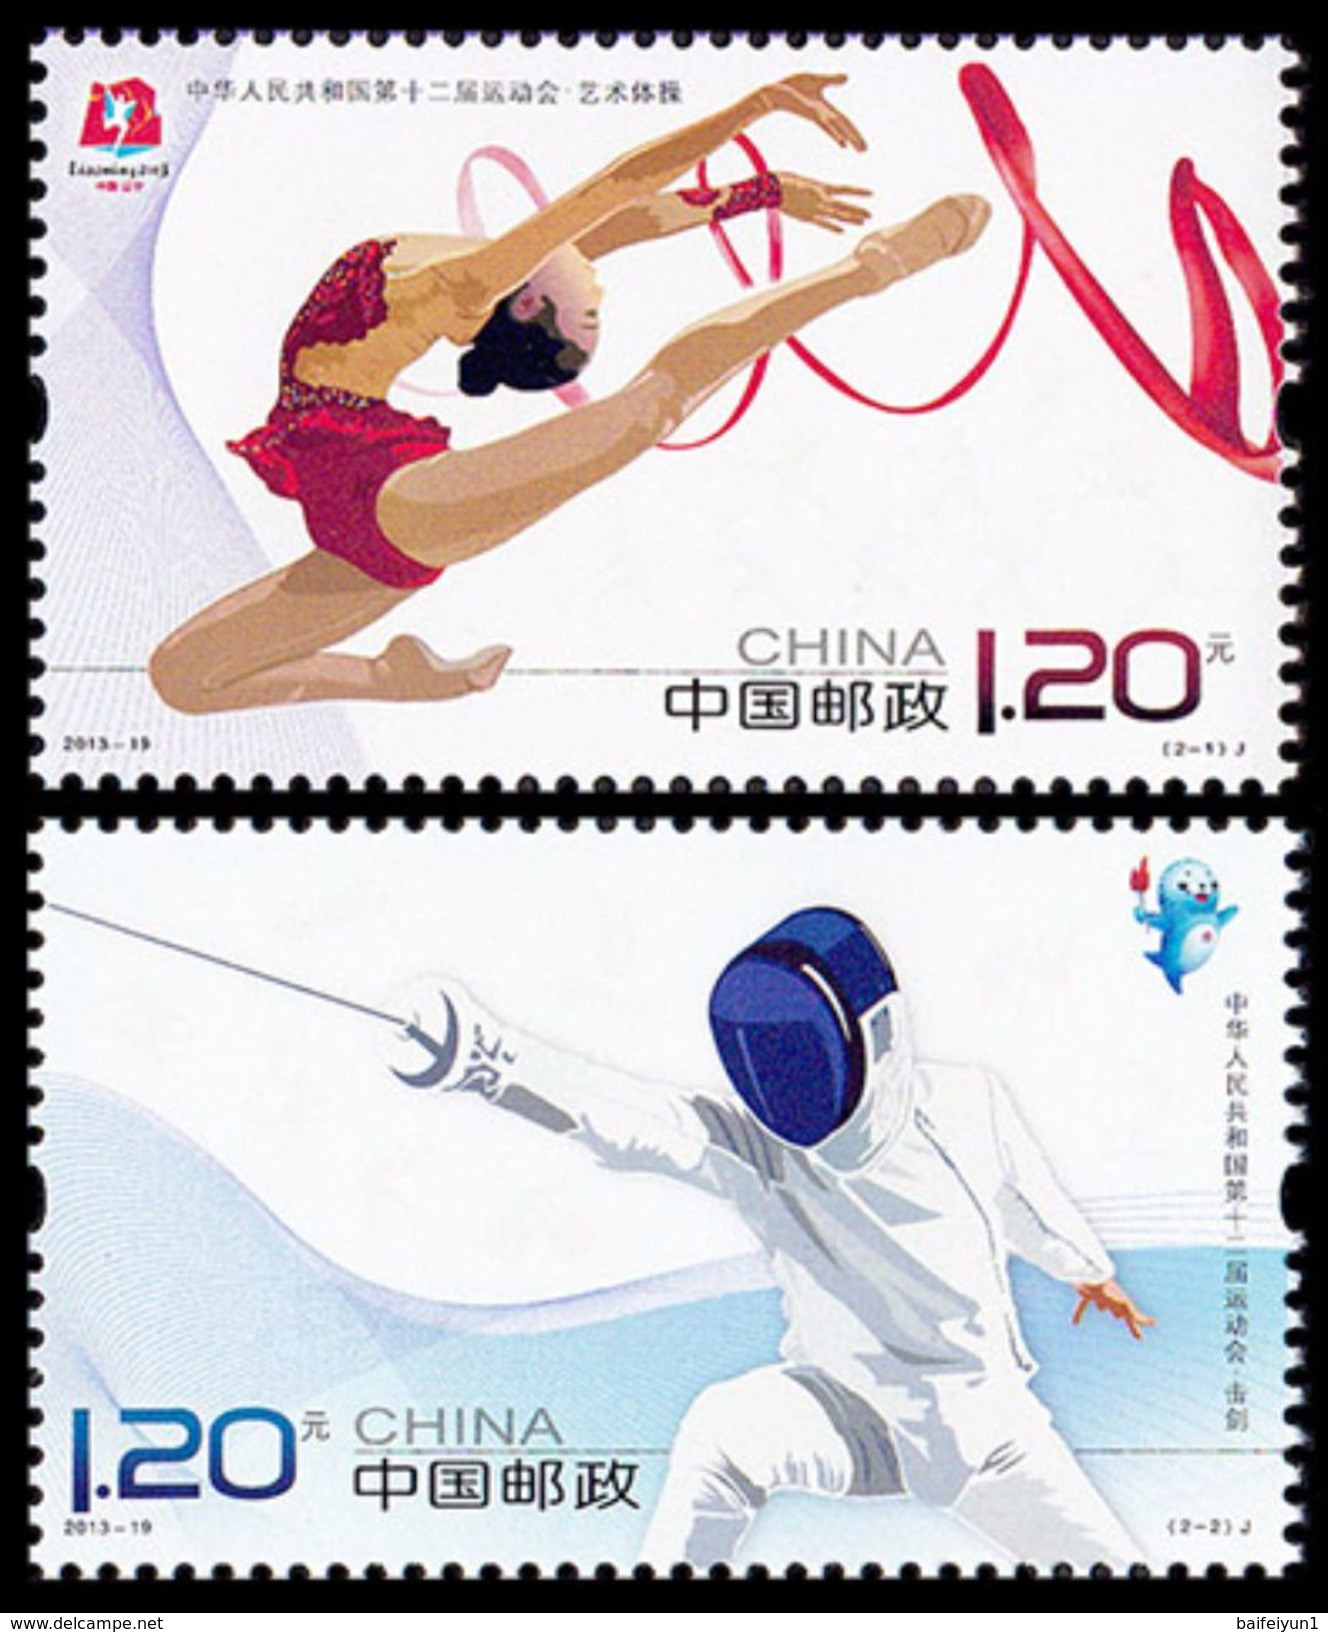 China 2013-19 The 12th Nat'l Games Of PRC 2V +S/S - Neufs